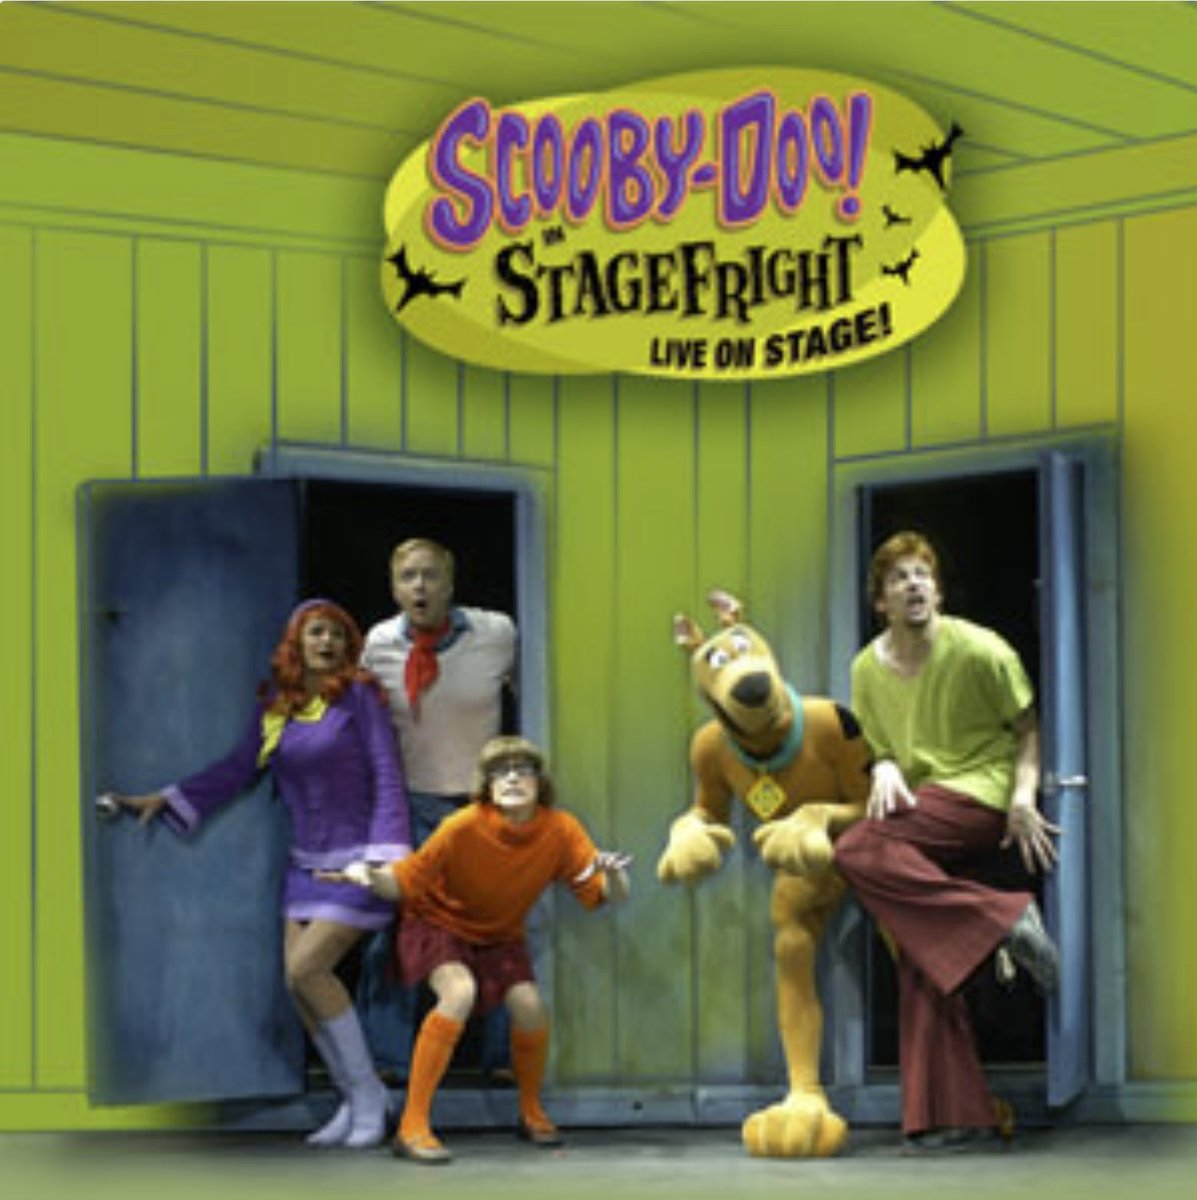 ON THIS DAY... May 1, 2002 - Scooby-Doo in Stagefright, Live on Stage! had it's final performance at the Times-Union Center in Jacksonville, FL. #scoobydoohistory #ScoobyDoo